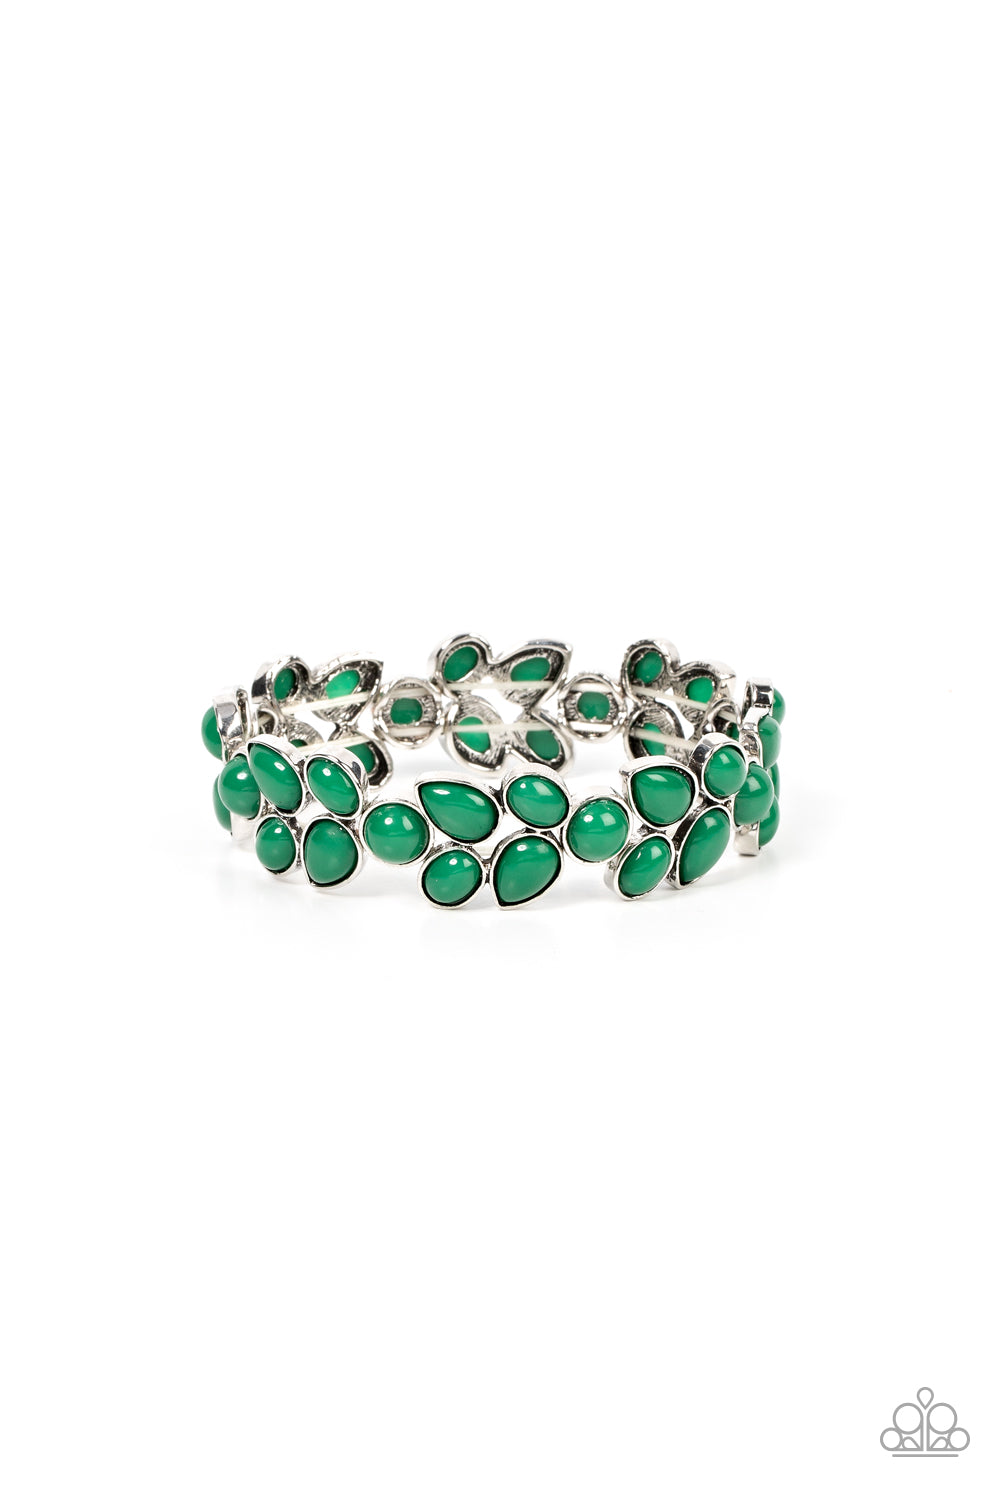 Marina Romance - Green and Silver Bracelet - Paparazzi Jewelry - Bejeweled Accessories By Kristie - A flourishing collection of Leprechaun oval, round, and teardrop beads coalesce into abstract floral-inspired frames. The enchanting frames, threaded along stretchy bands, add a refreshing pop of color around the wrist. Sold as one individual bracelet.